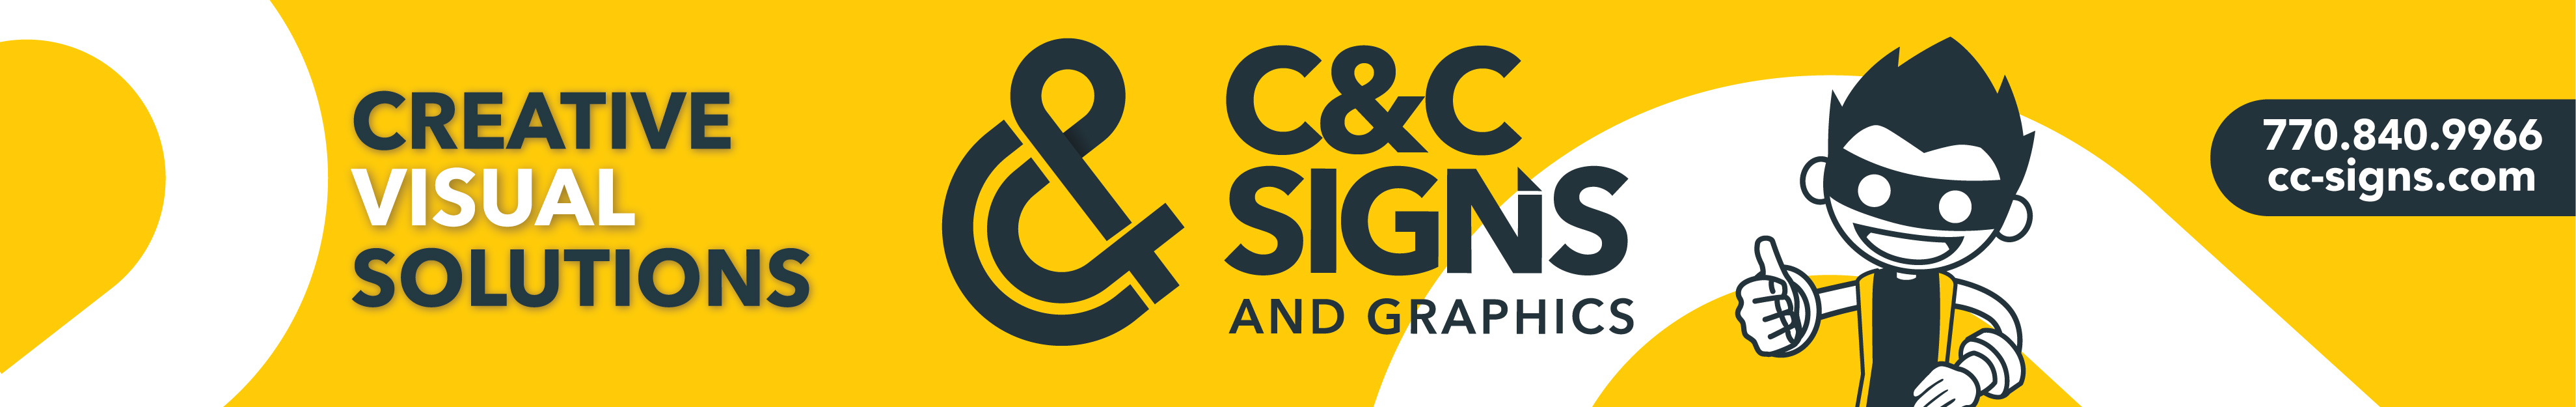 C&amp;C Signs Banner GHCA -01